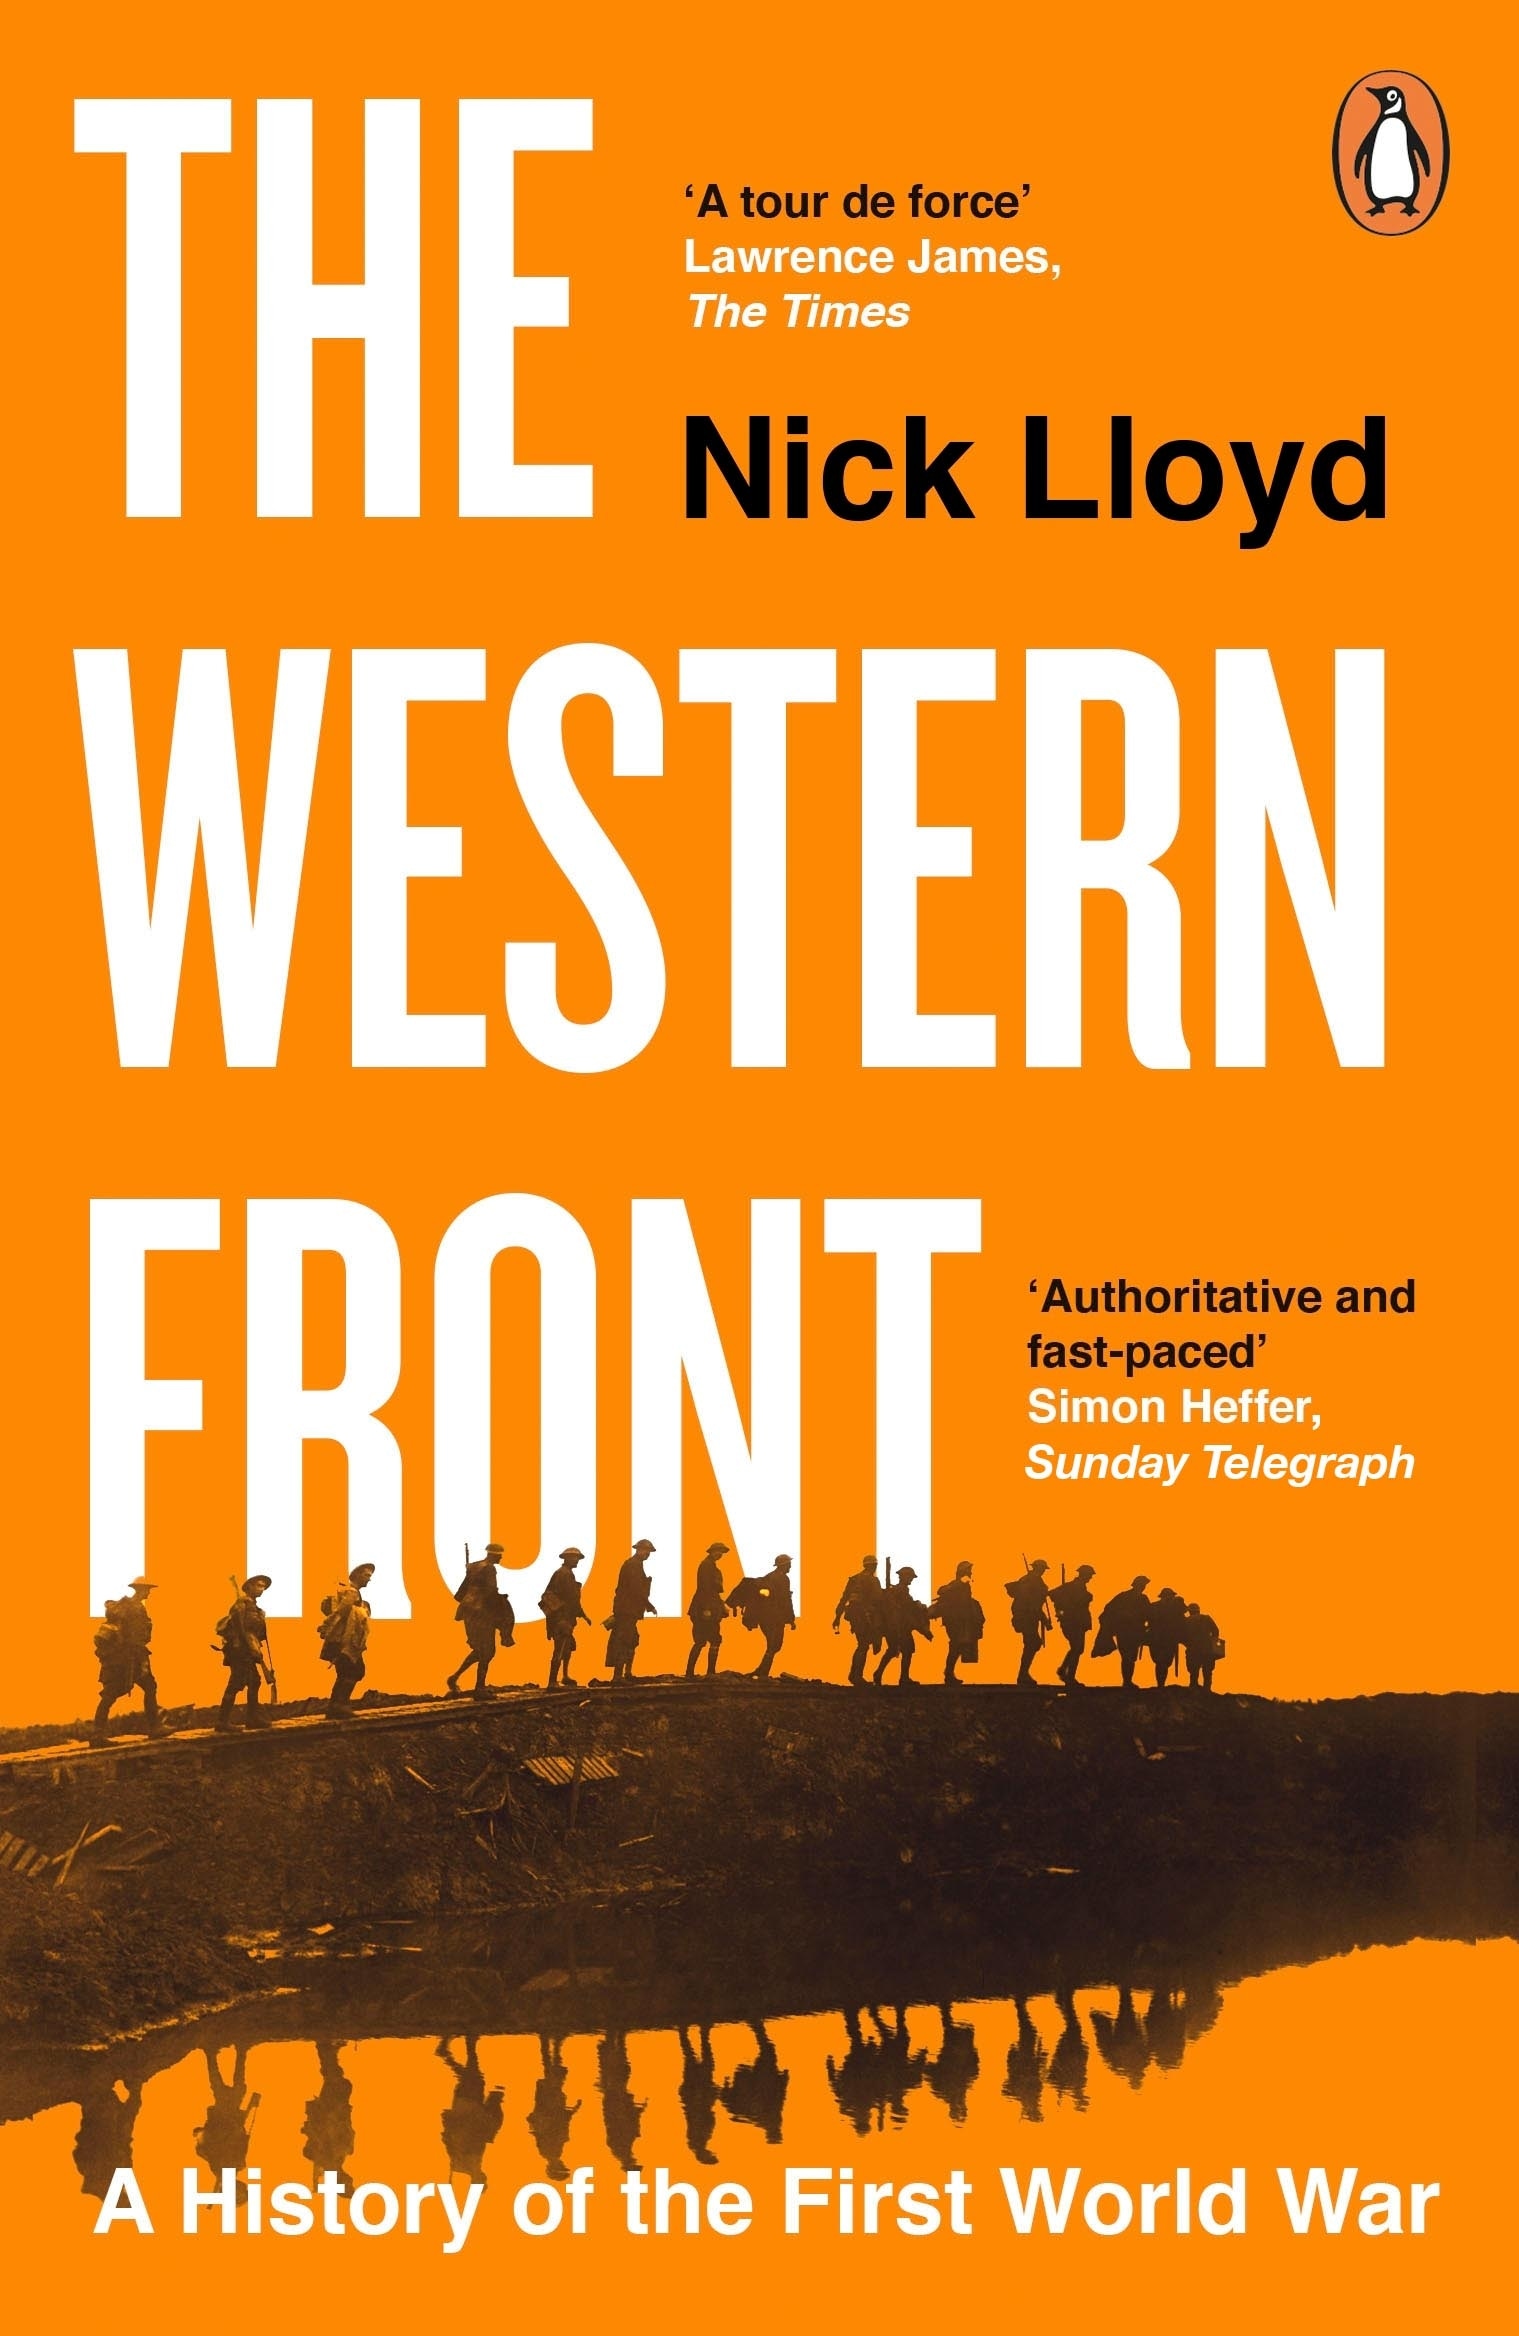 Book “The Western Front” by Nick Lloyd — November 4, 2021